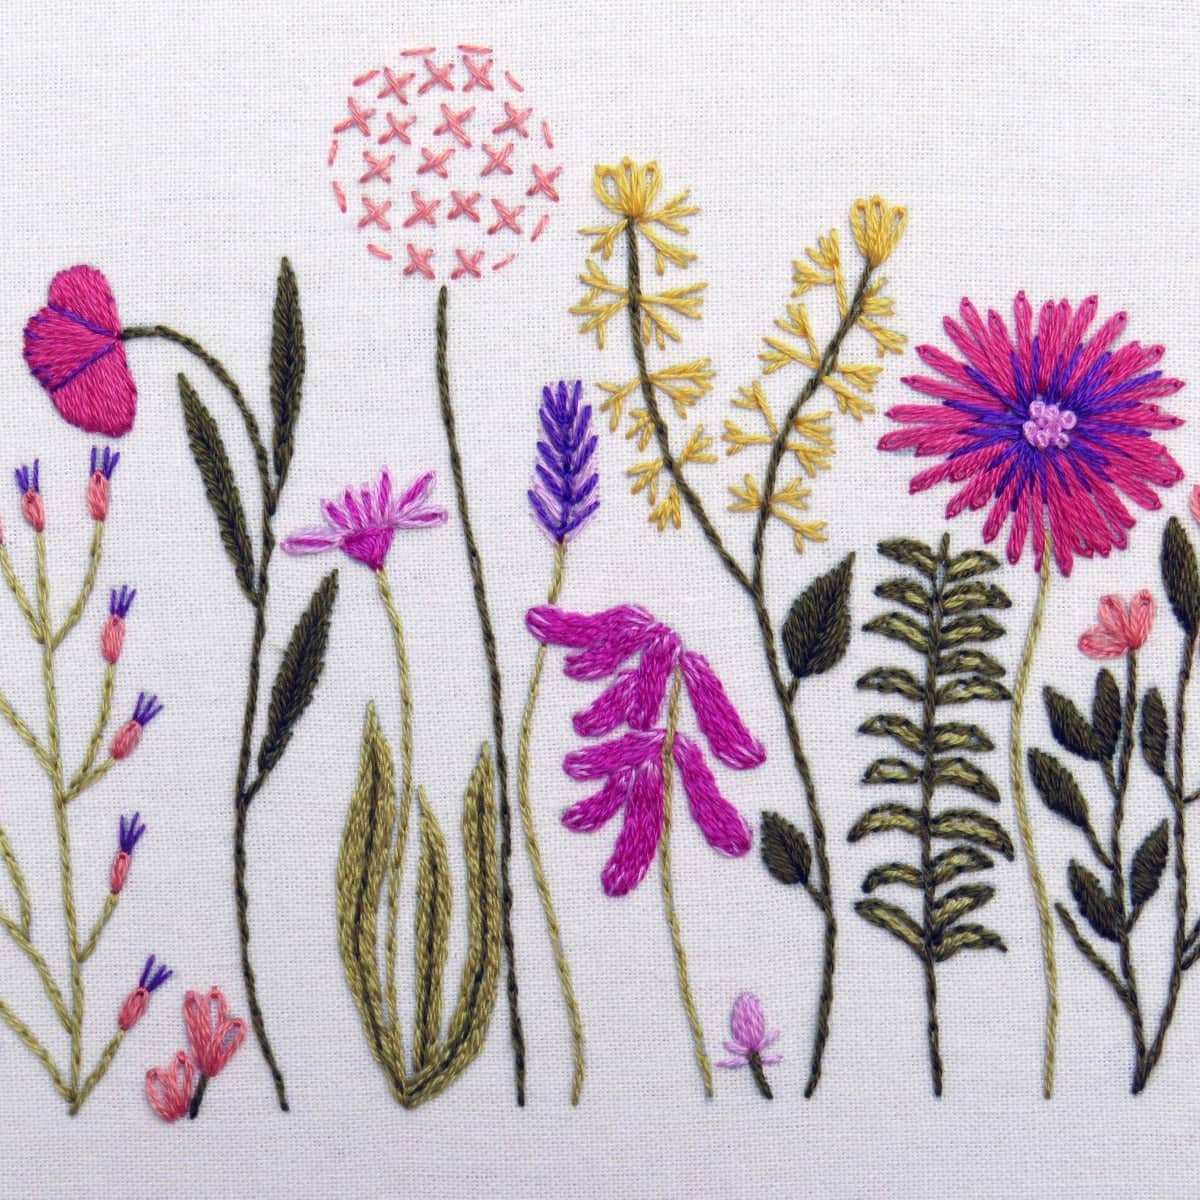 Free Hand Embroidery Pattern for October – Marigold Flower - Stitchdoodles